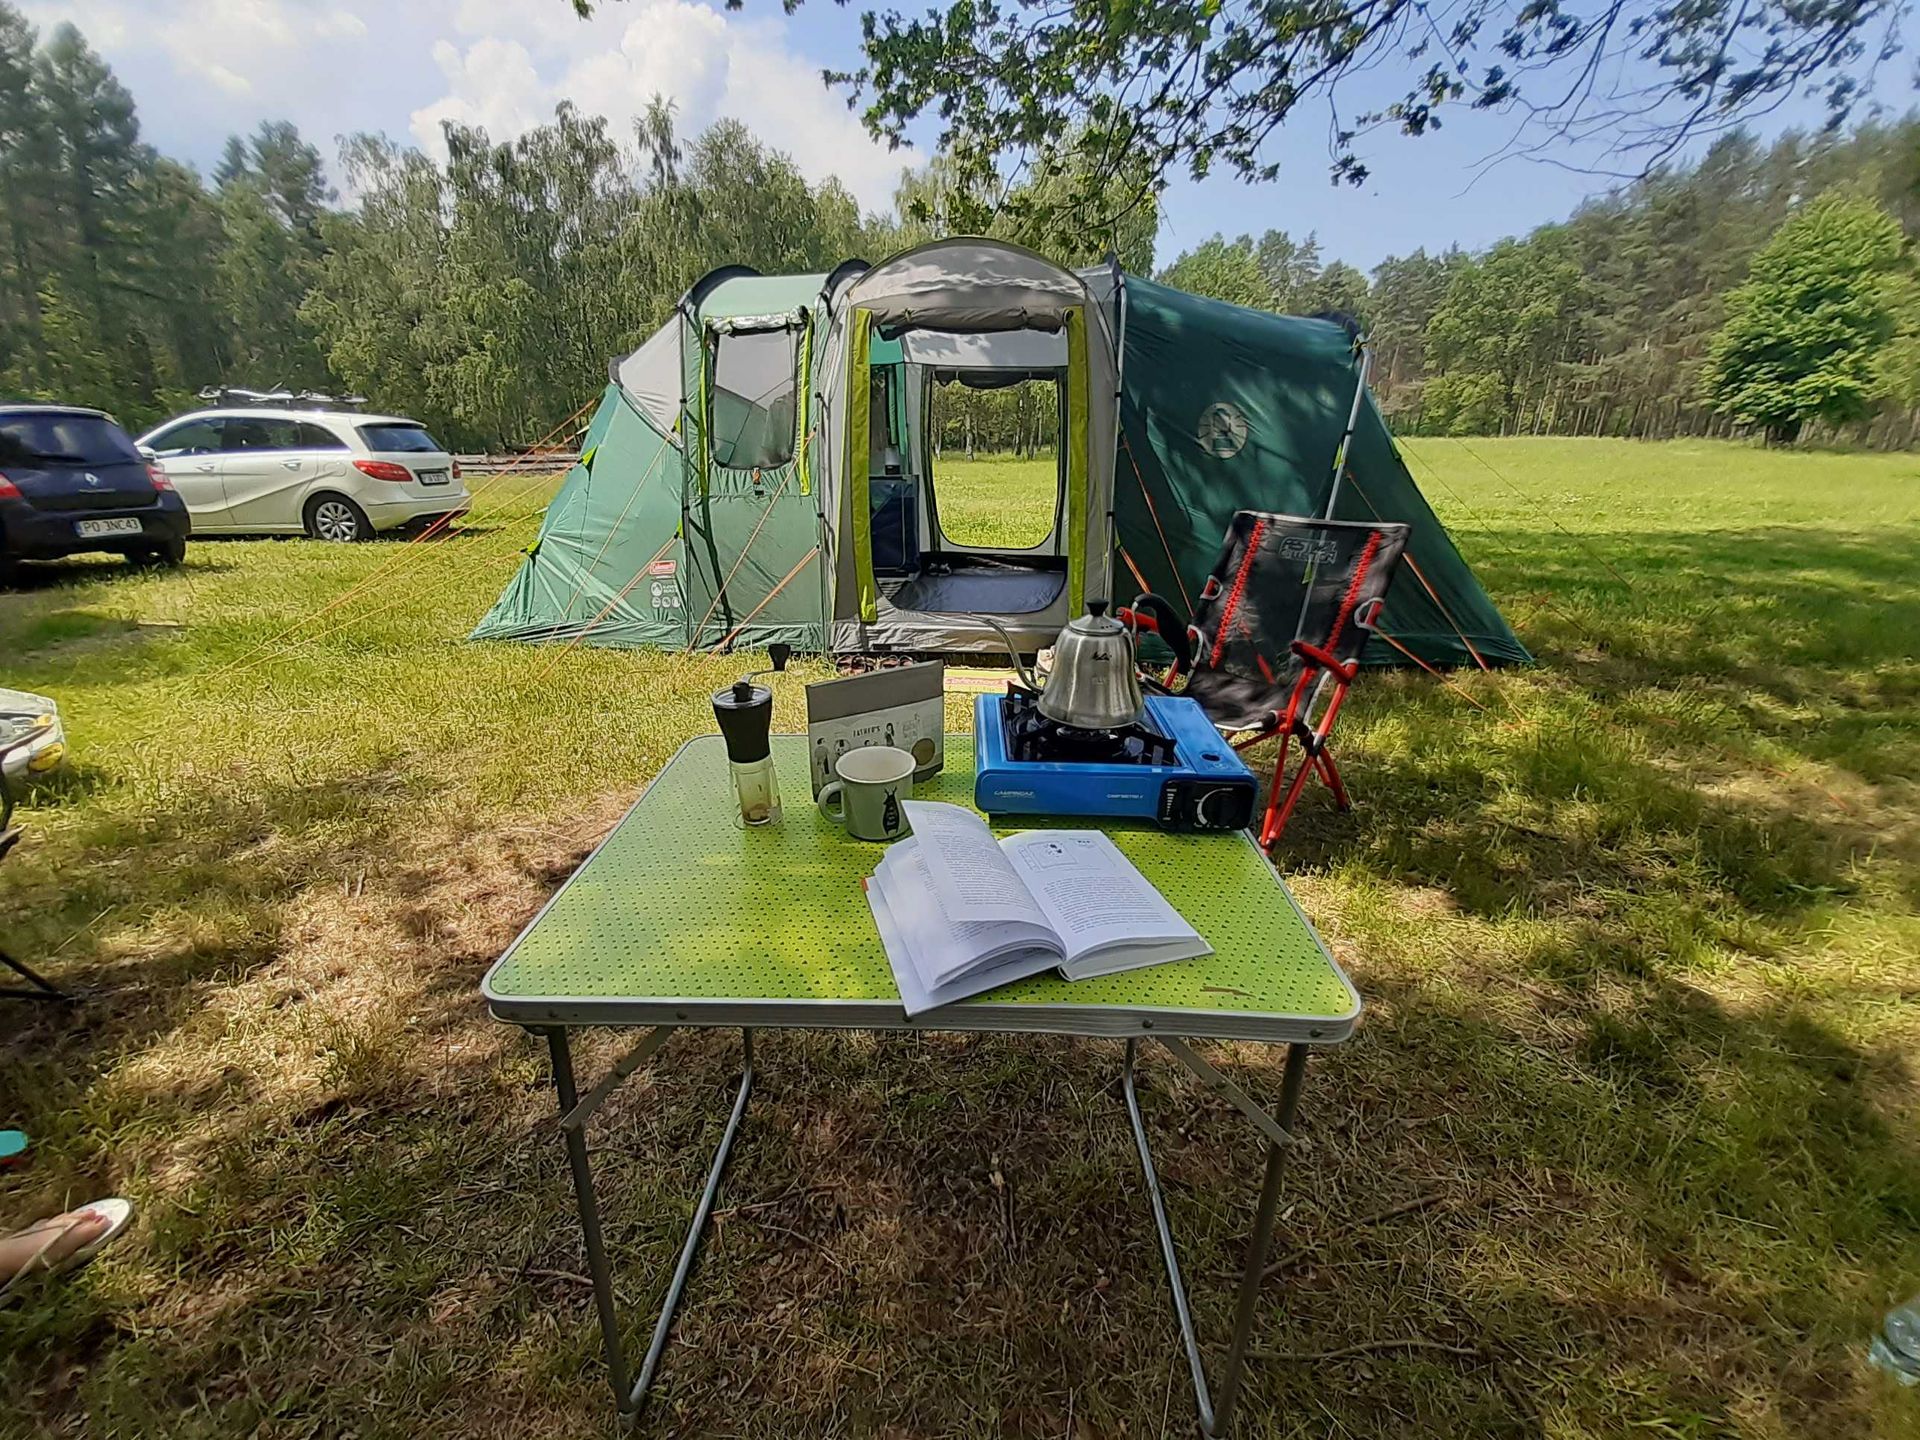 Cooking at the campsite. Which cooker to choose? – main image